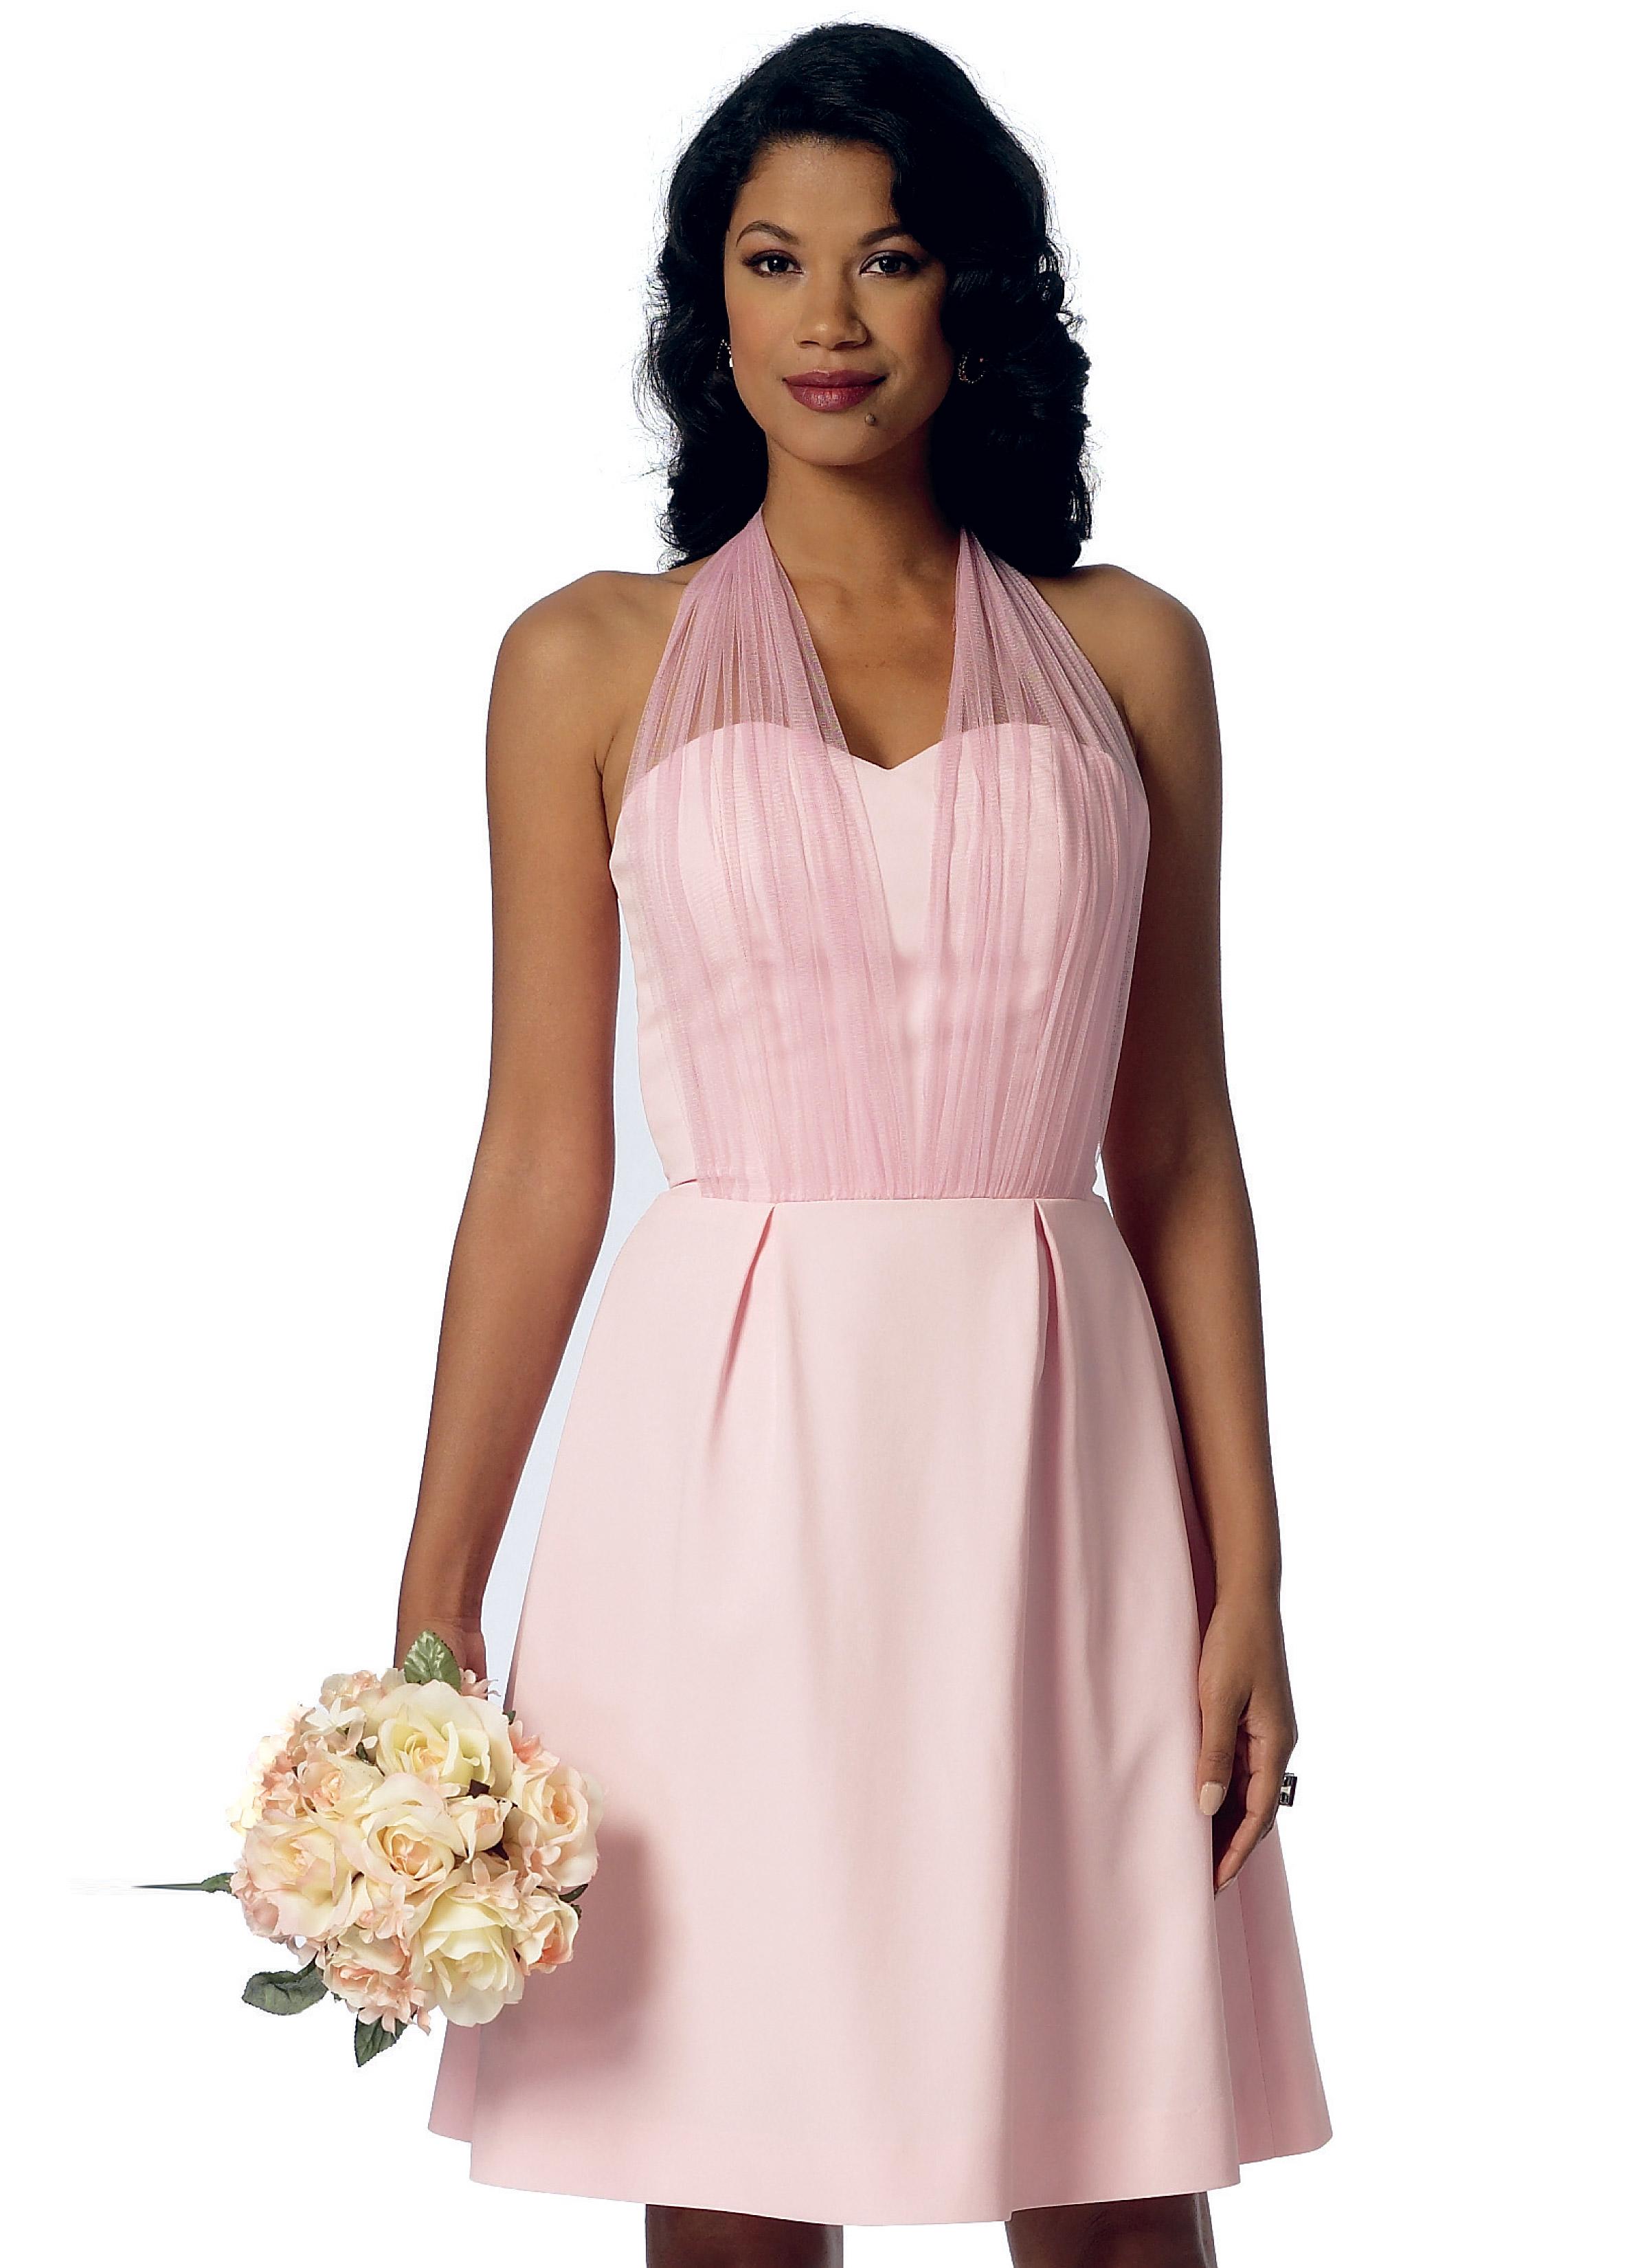 Butterick B6131 Misses' Dress and Sash